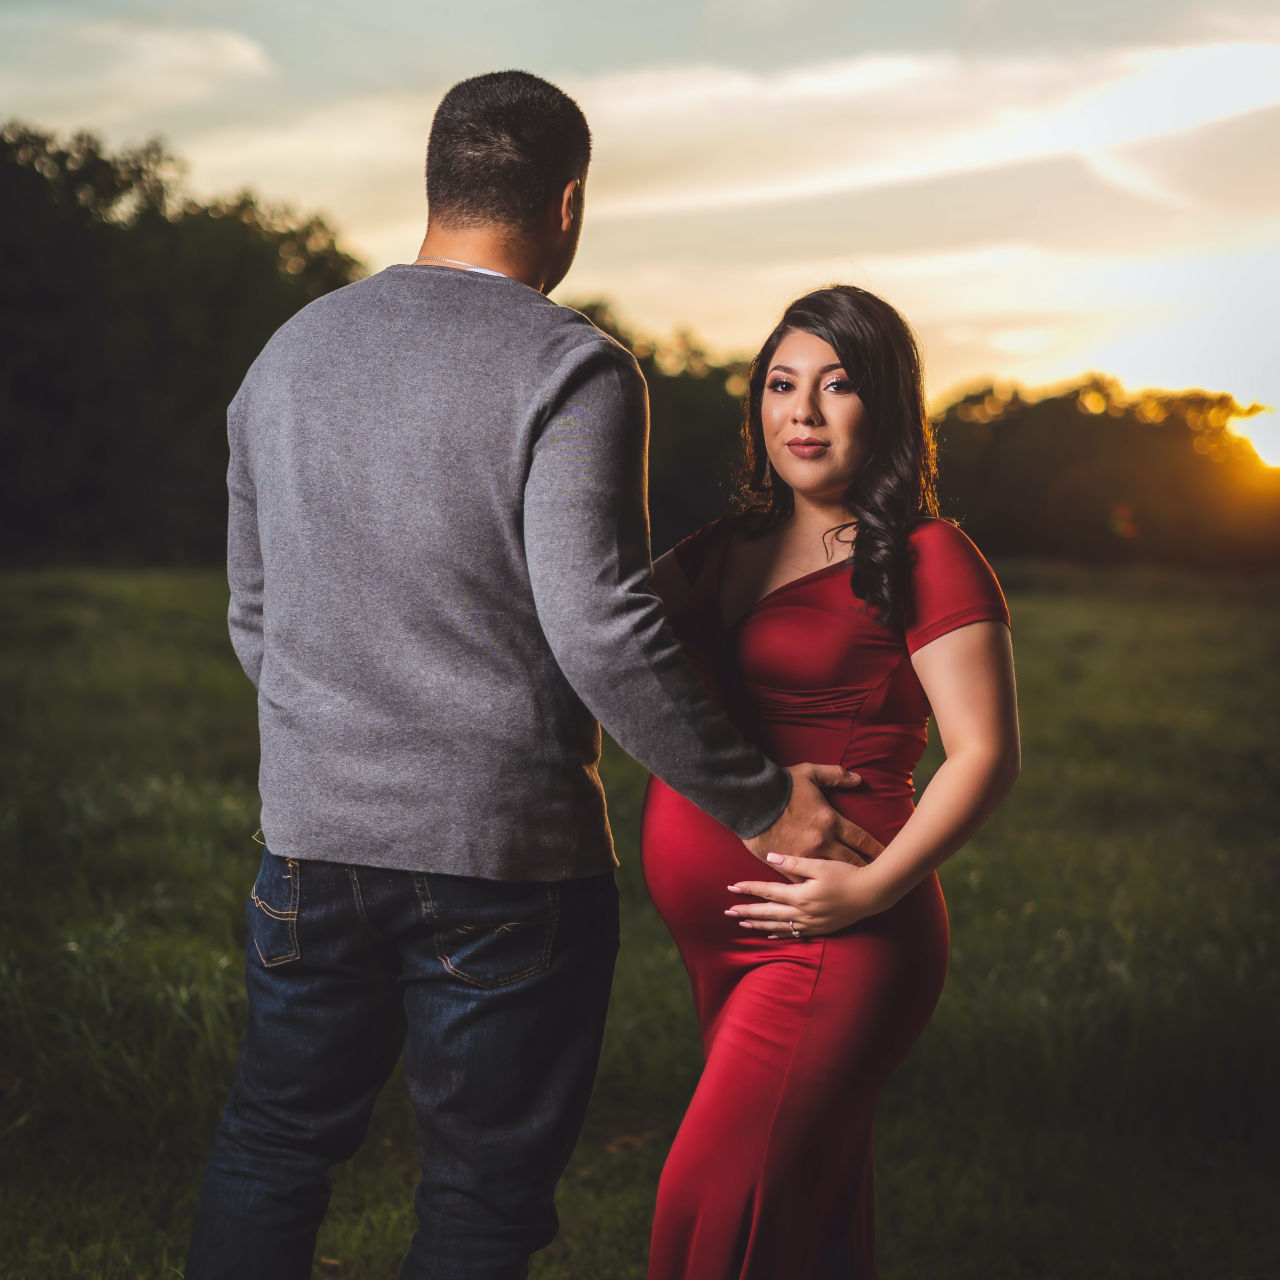 Nurturing Your Relationship During Pregnancy | Pregnancy photoshoot,  Pregnancy photos, Maternity photography poses